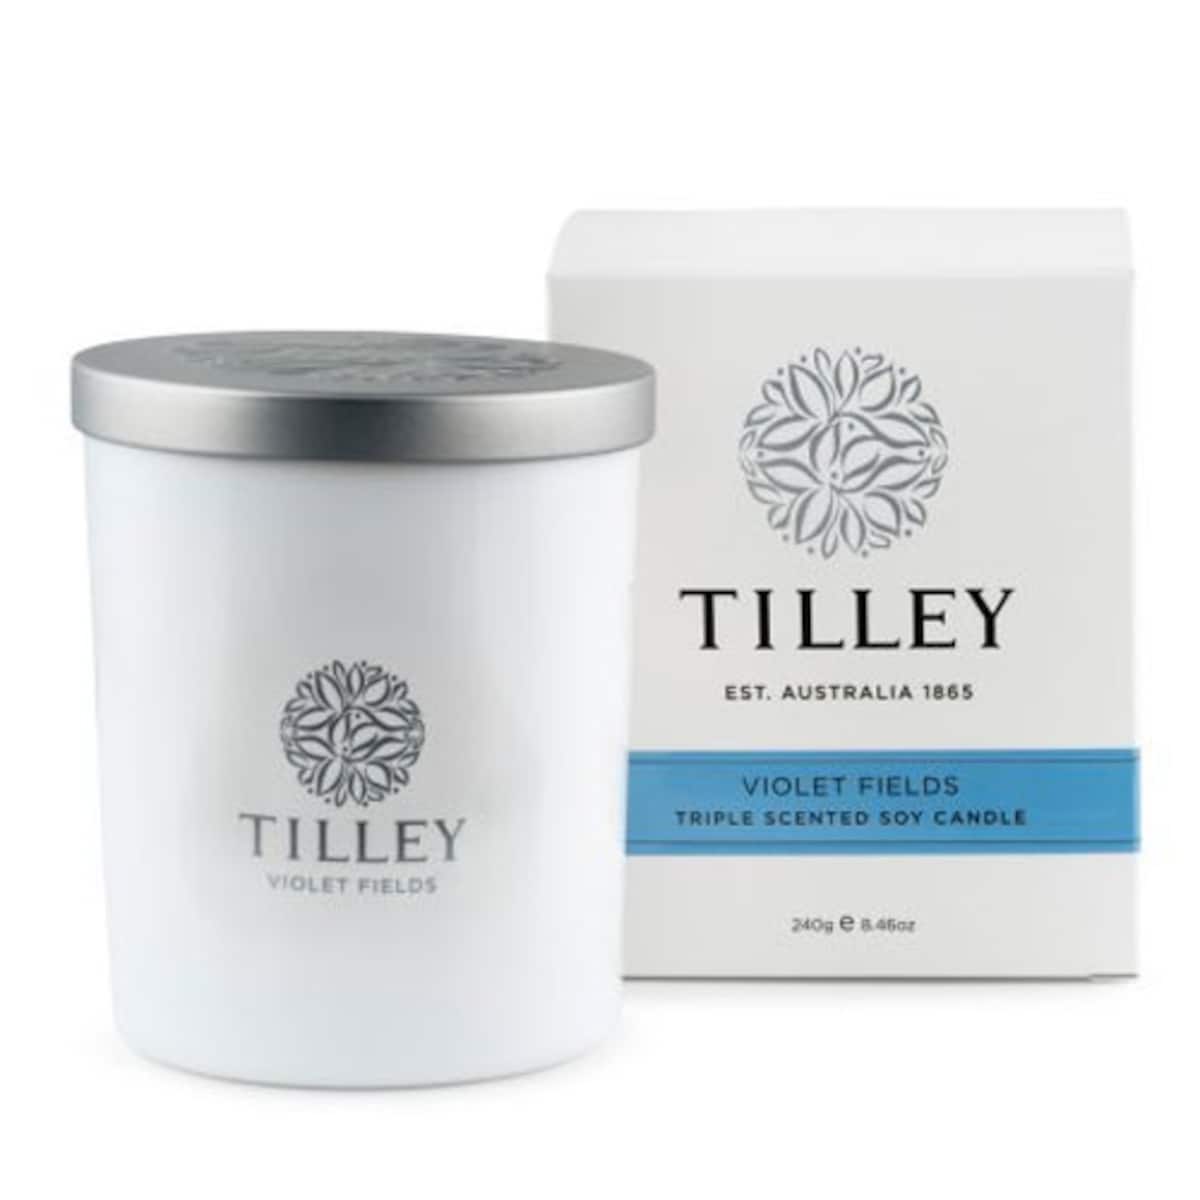 Tilley Scented Soy Candle Violet Fields 240g